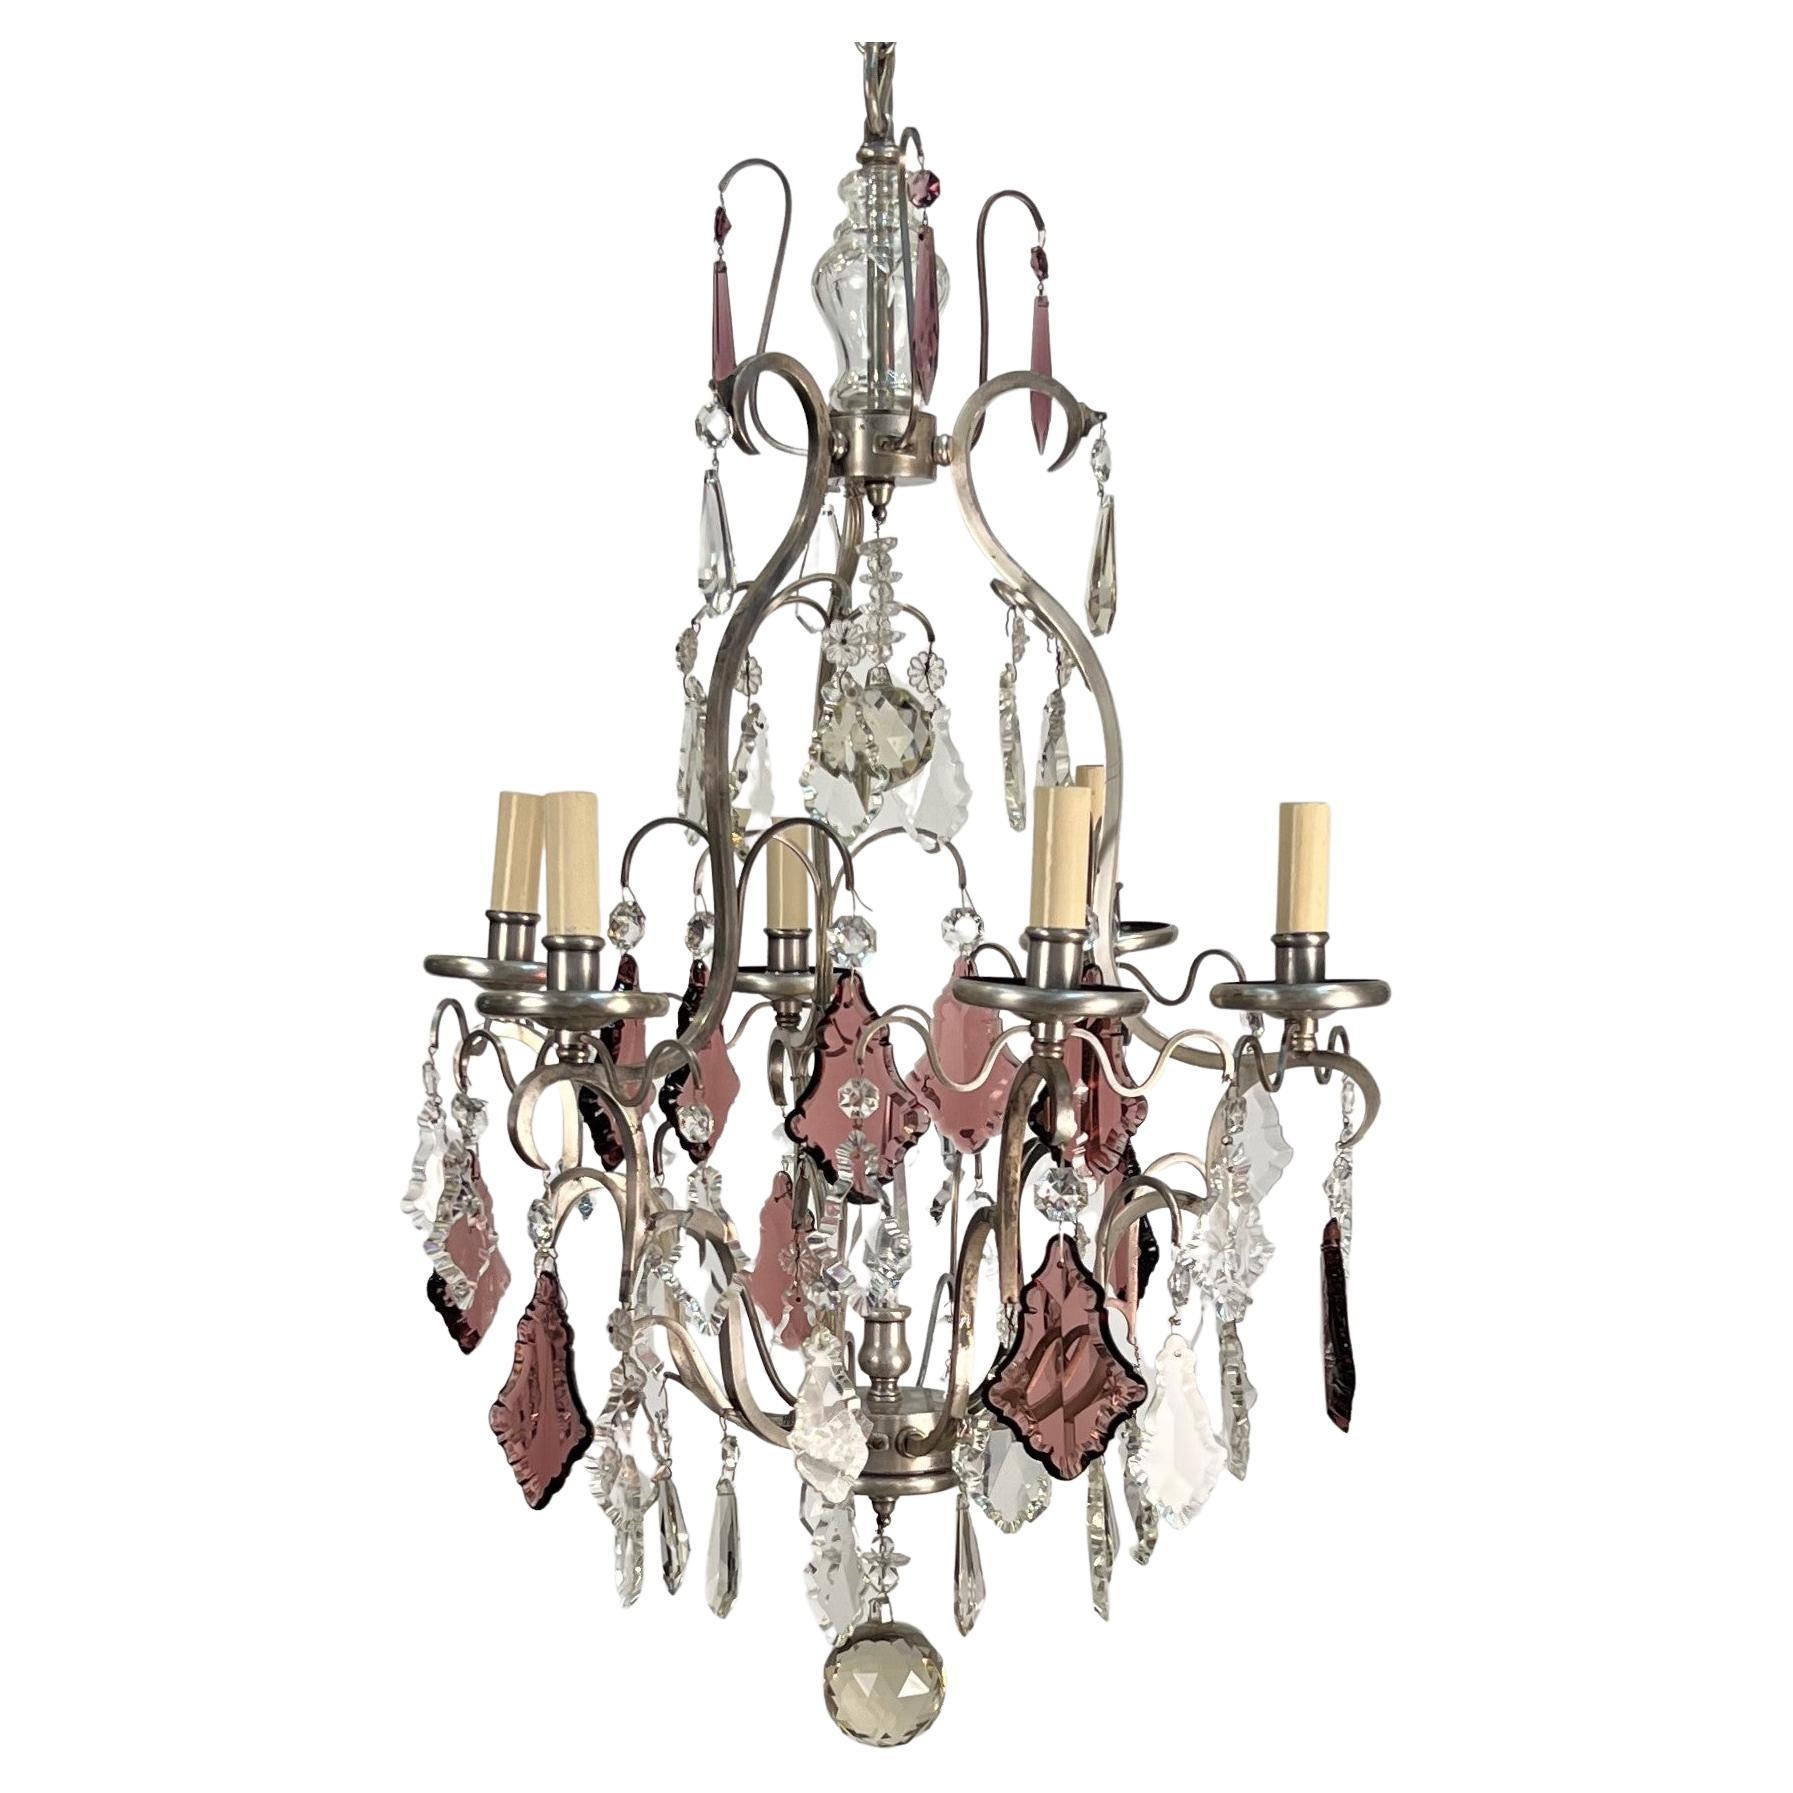 20th Century Italian Silvered Bronze & Crystal Louis XVI Style Chandelier For Sale